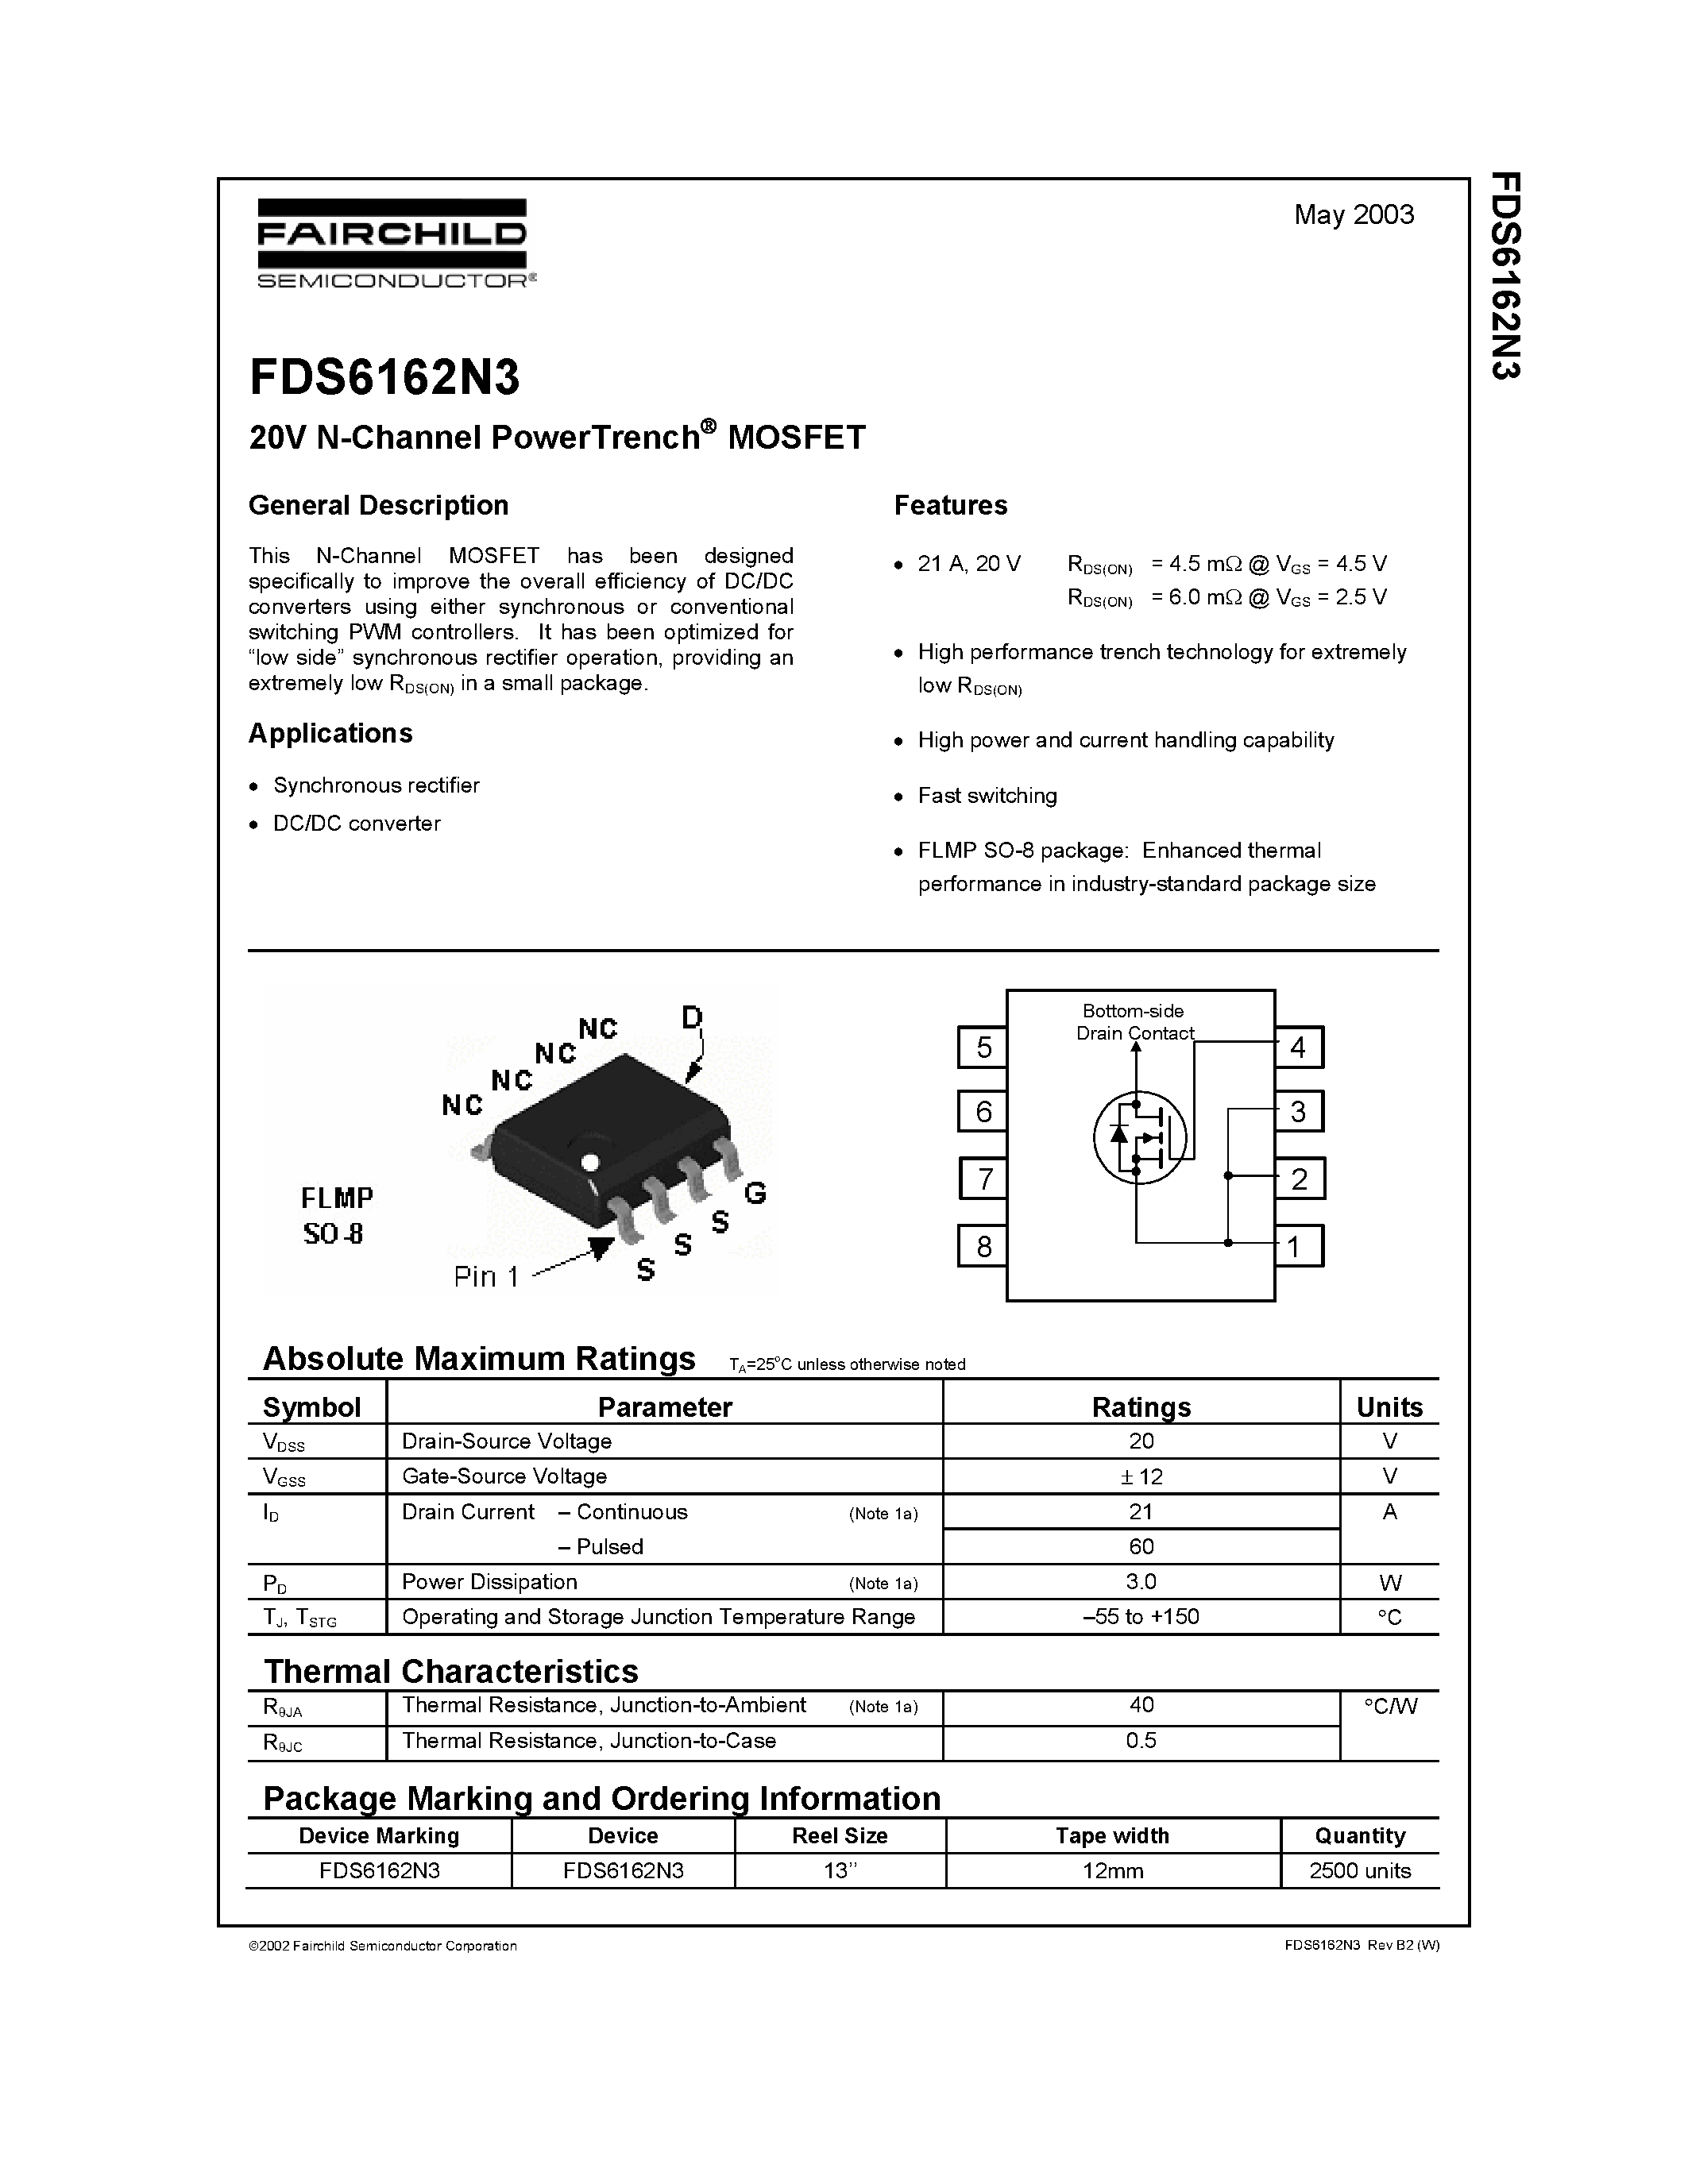 Даташит FDS6162N3 - 20V N-Channel PowerTrench MOSFET страница 1